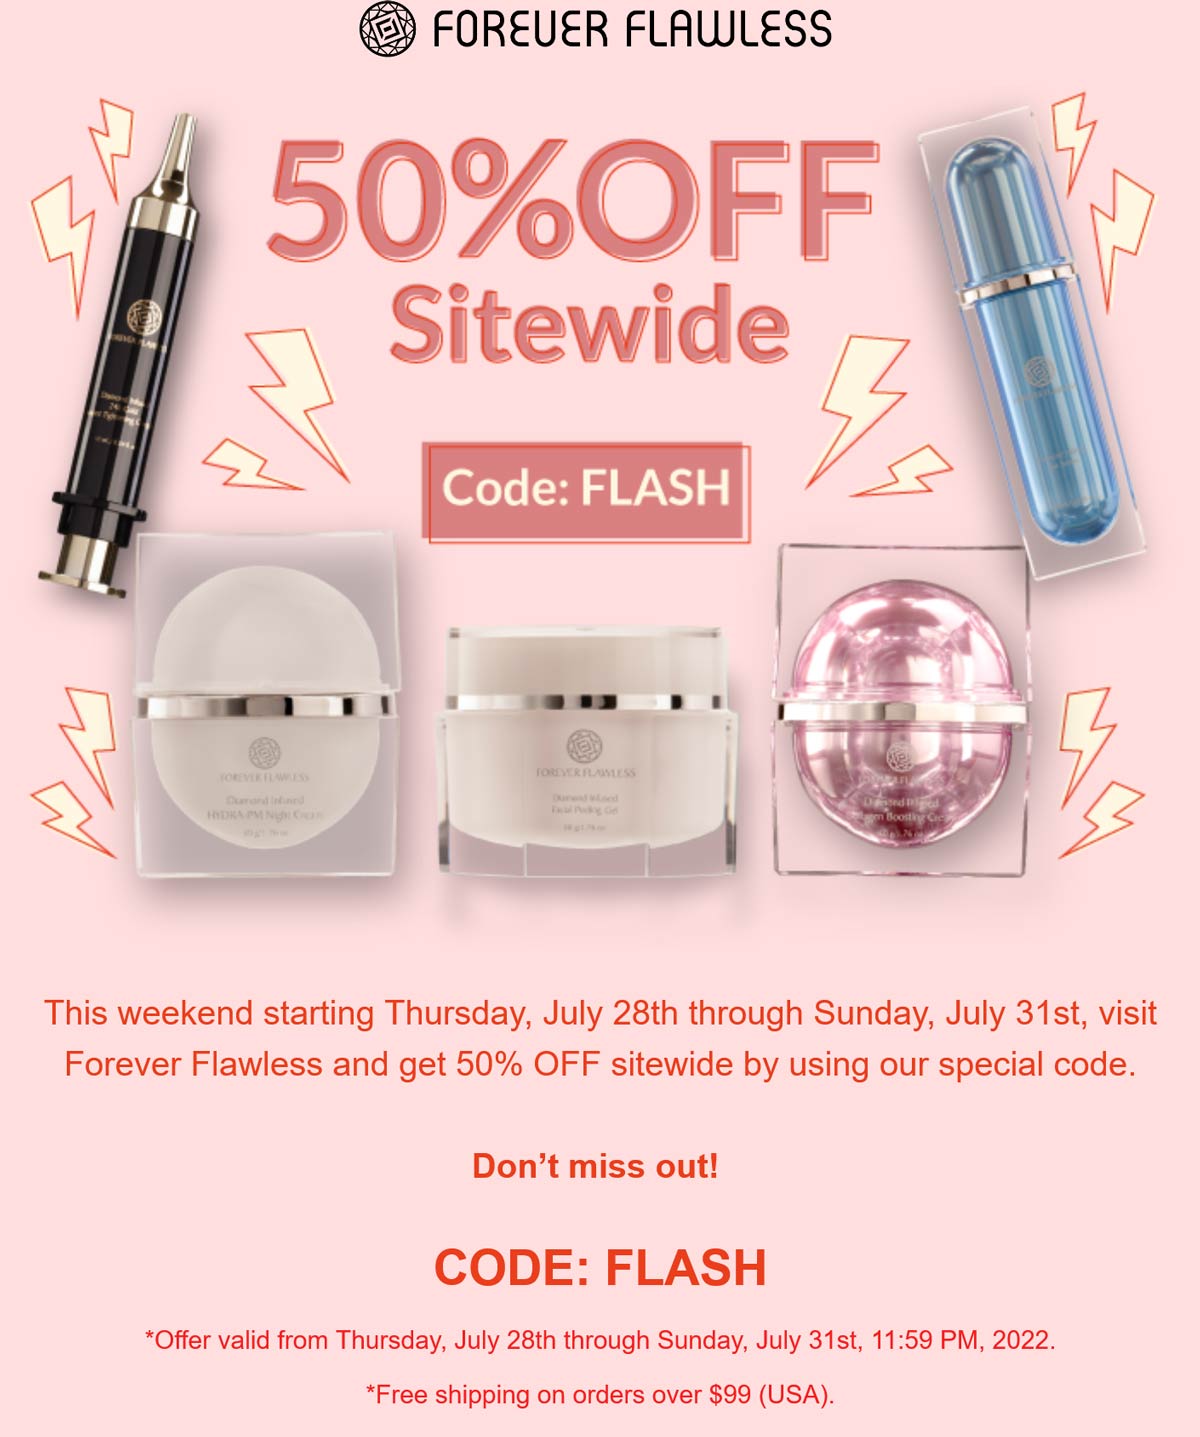 Forever Flawless stores Coupon  50% off everything today at Forever Flawless via promo code FLASH #foreverflawless 